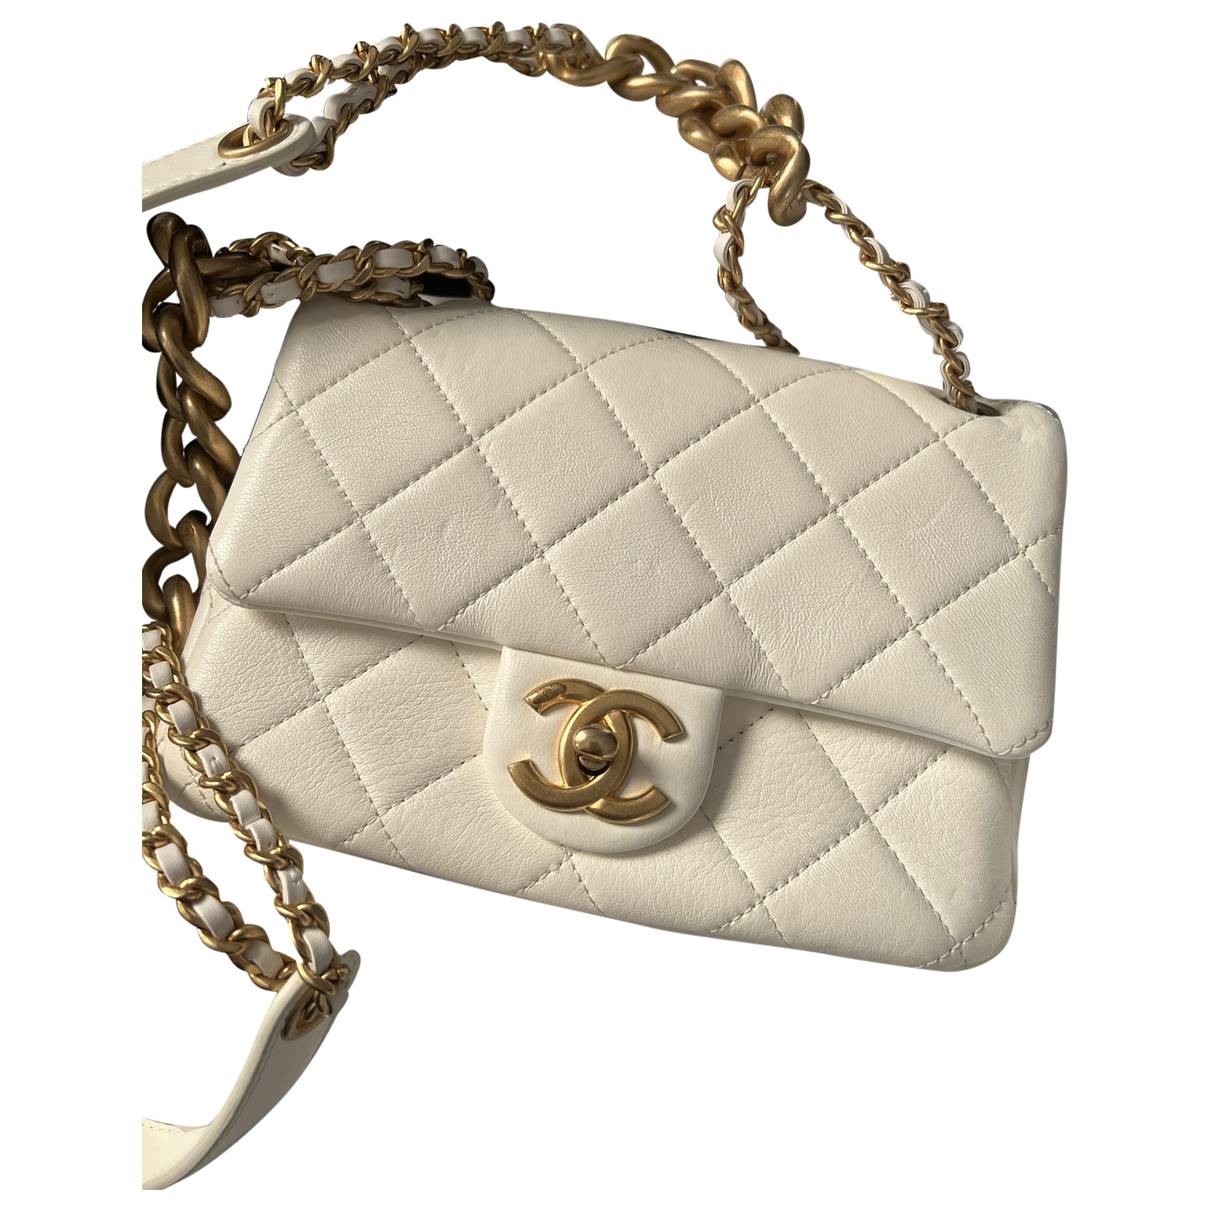 Timeless/classique leather crossbody bag Chanel White in Leather